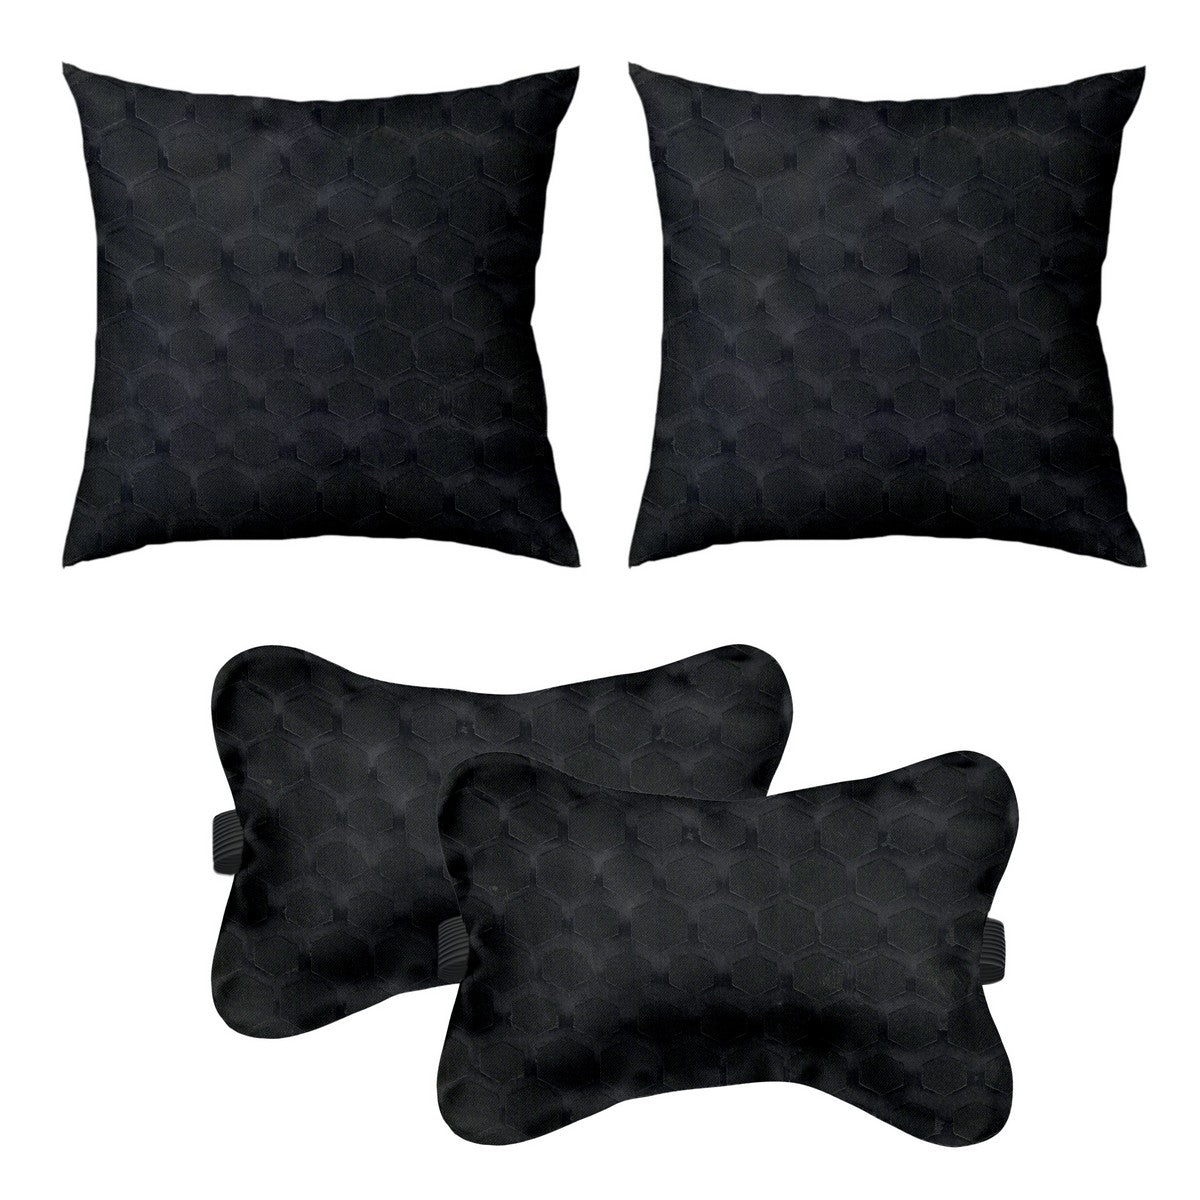 Car Cushion Pillows for Neck, Back and Seat Rest, Pack of 4, Embossed Leatherlike Fabric 100% Polyester Material, 2 PCs of Bone Neck Rest Size: 6x10 Inches, 2 Pcs of Car Cushion Size: 12x12 Inches, Black, by Lushomes